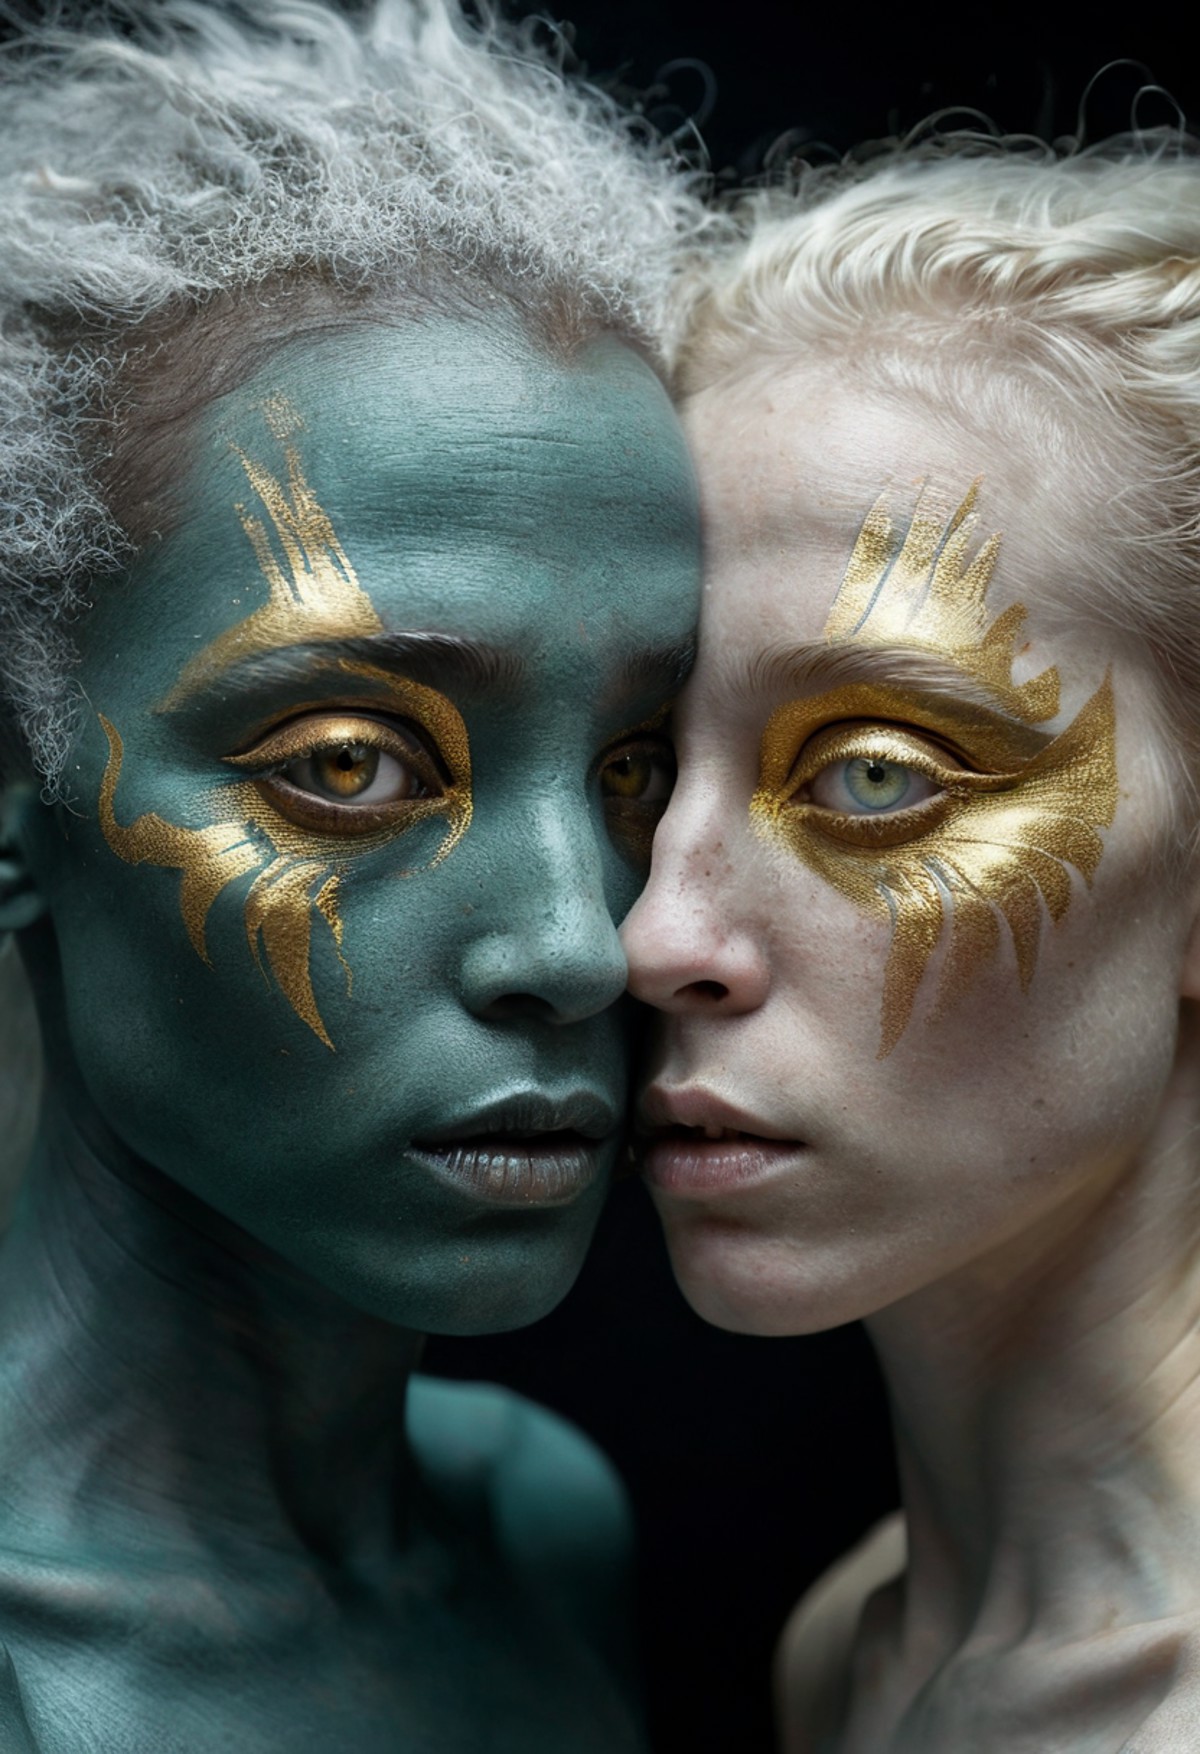 professional photography by Olivier Valsecchi, closeup portrait a half-alien and half-human woman with teal-coloured skin ...